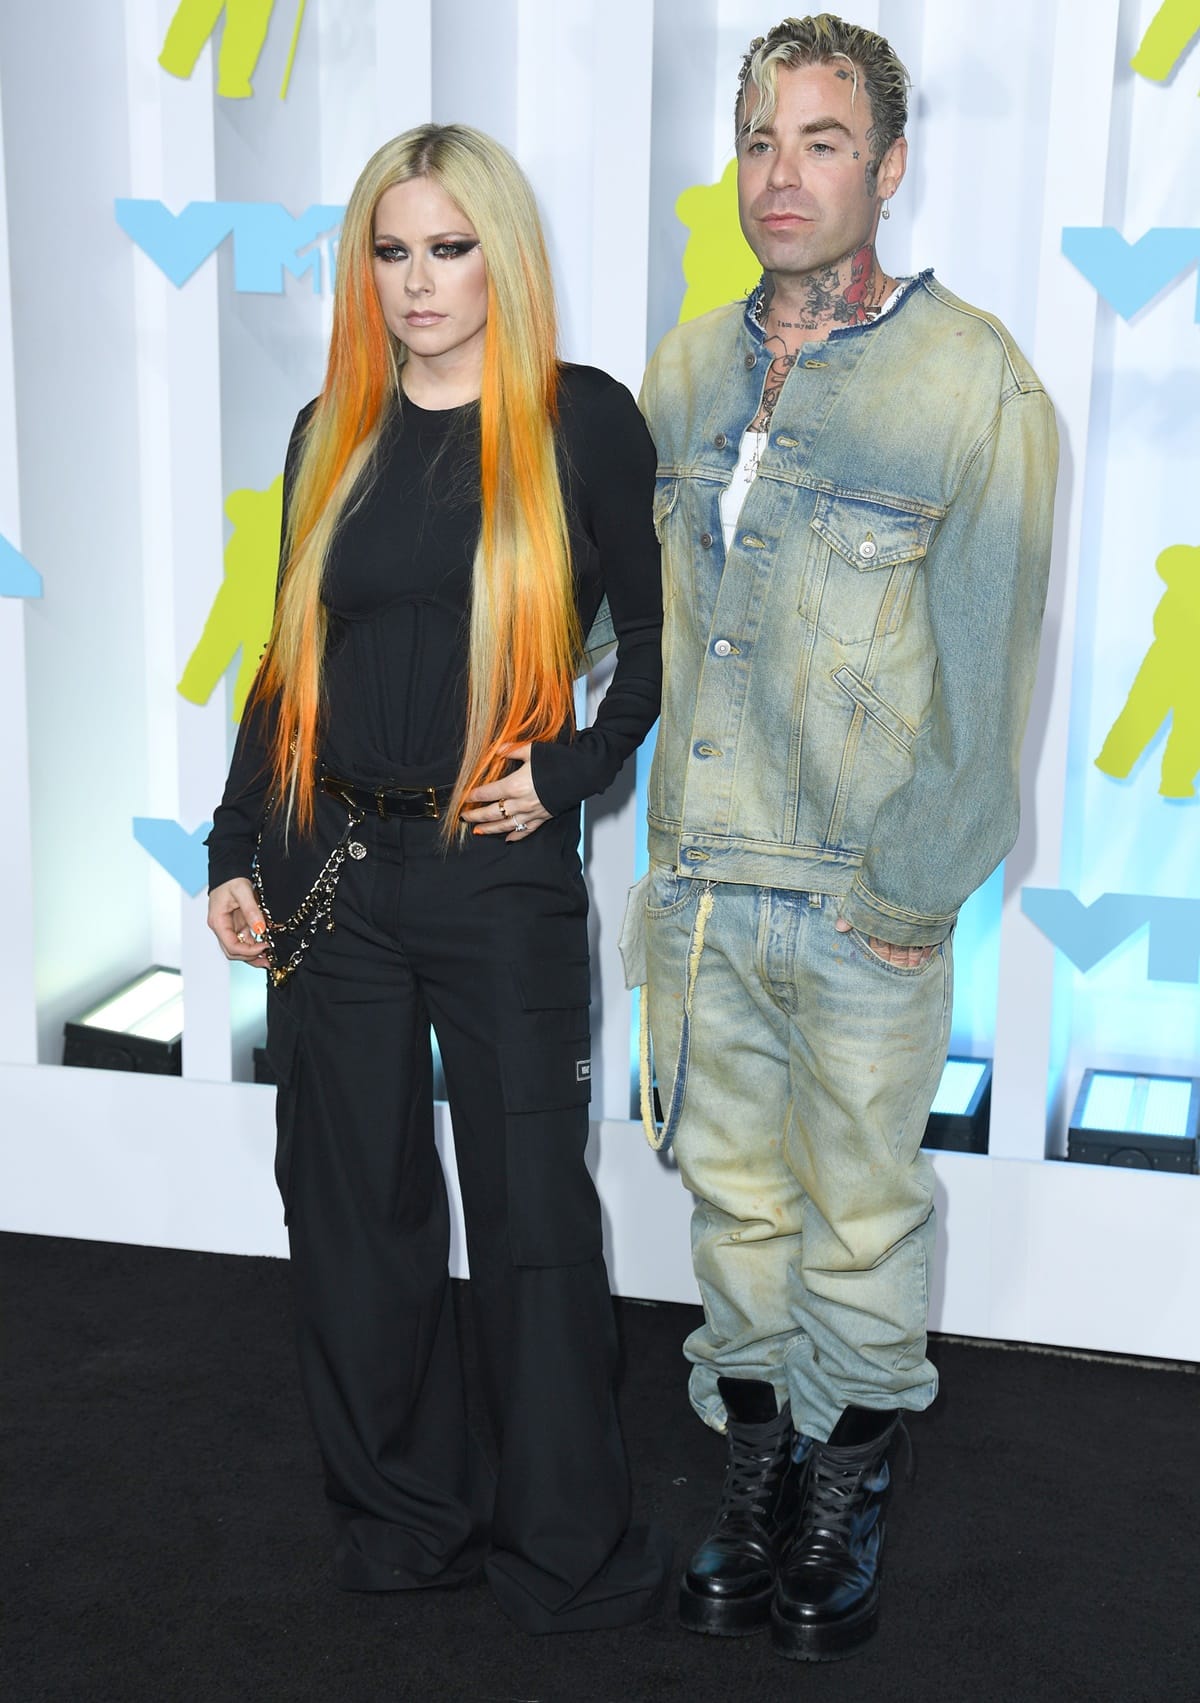 Avril Lavigne and Mod Sun, who became engaged in April 2022, have decided to end their engagement